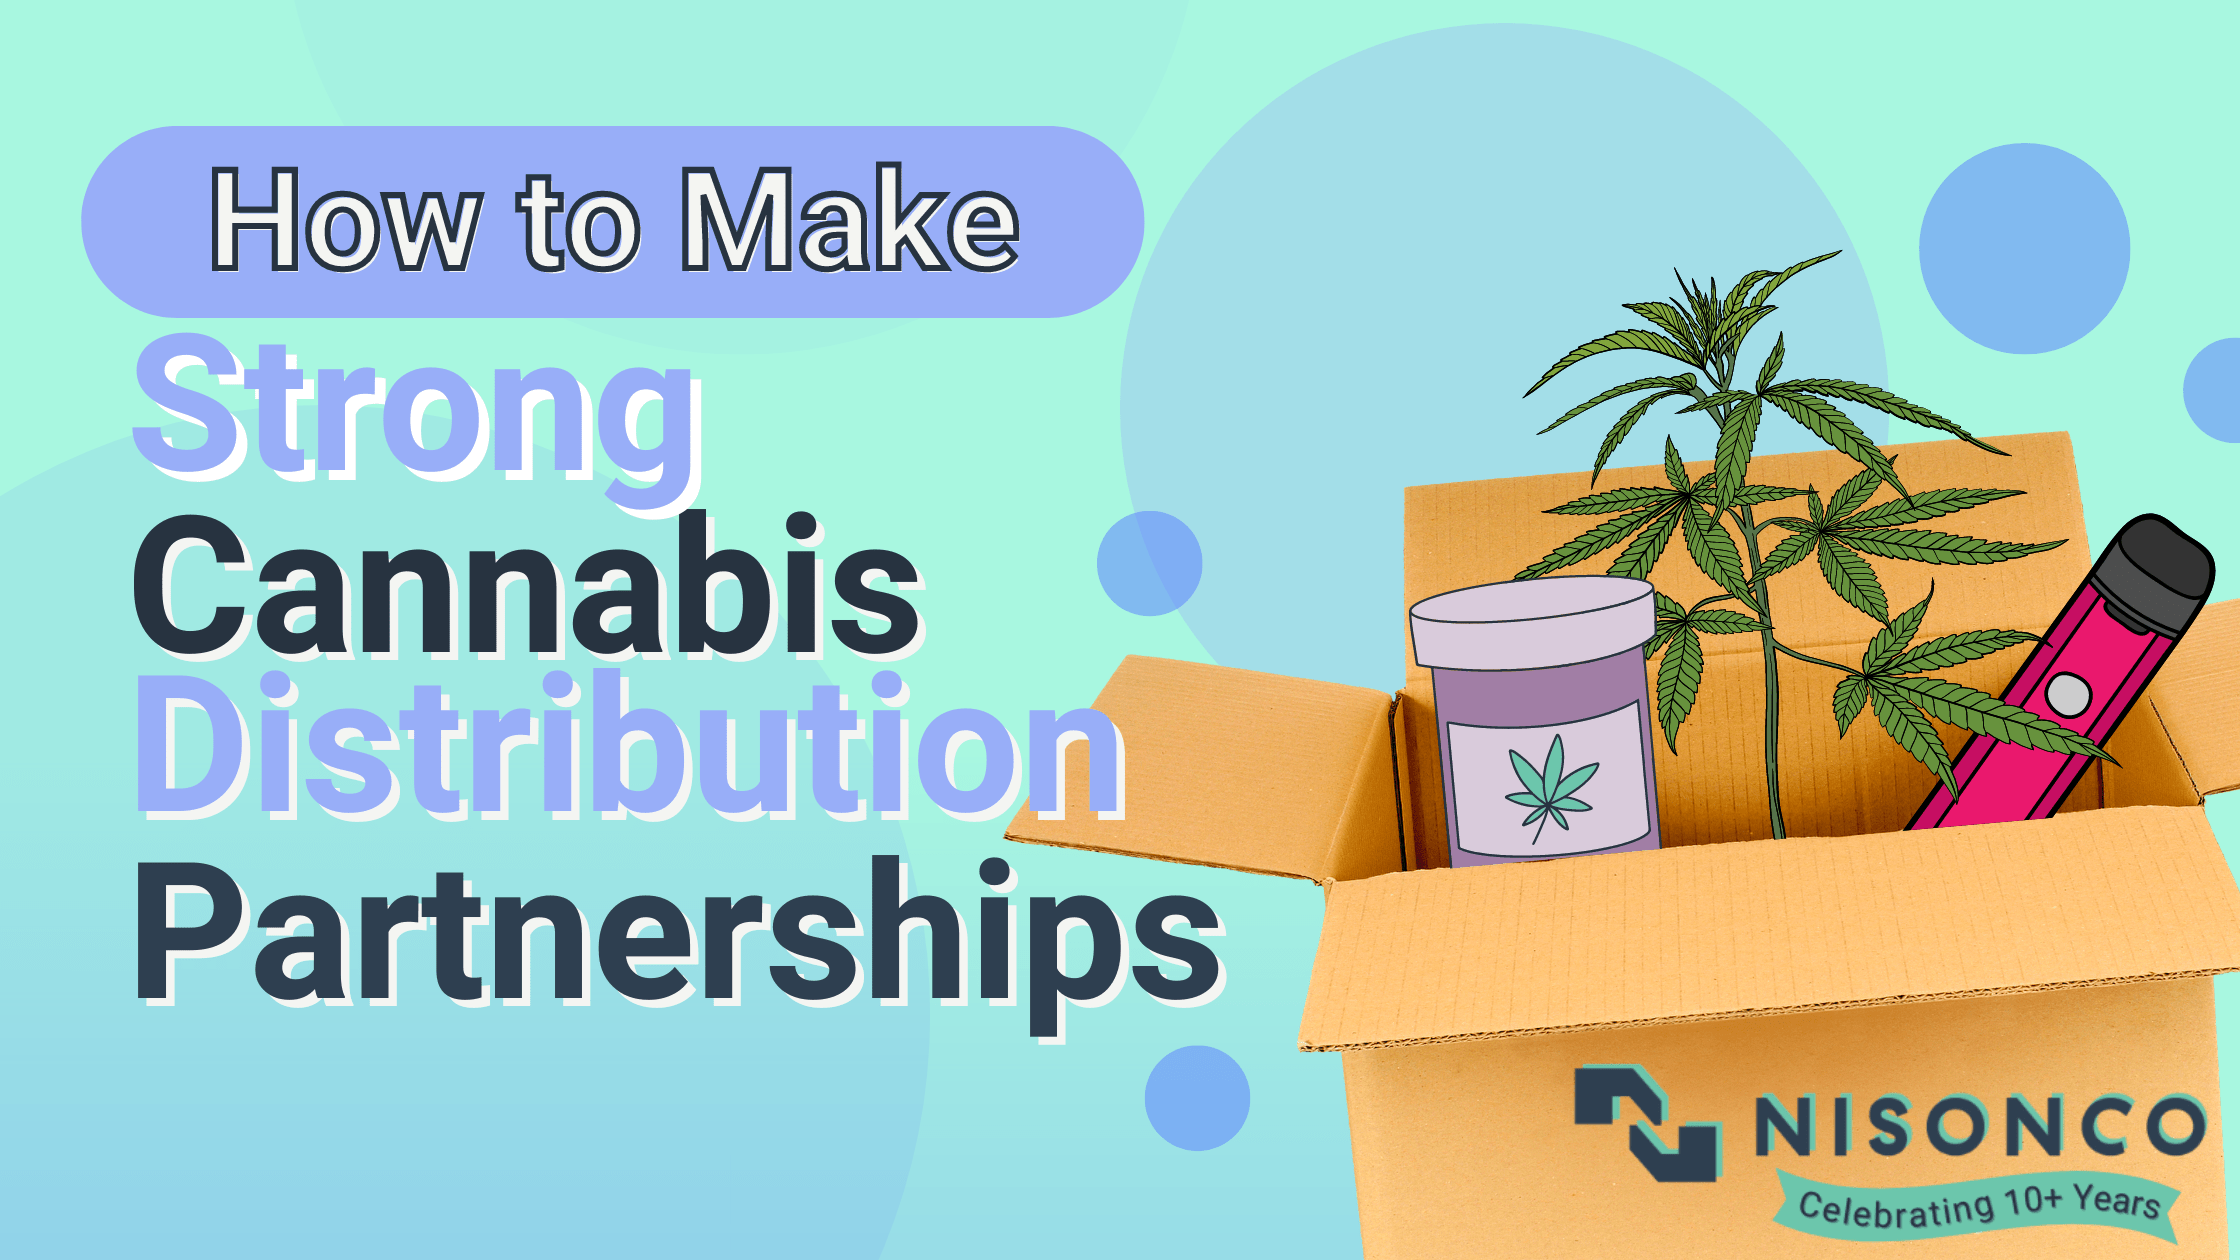 The text 'How to Make Strong Cannabis Distribution Partnerships' is to the left of a cardboard box with a cannabis plant, prescription and vape inside.